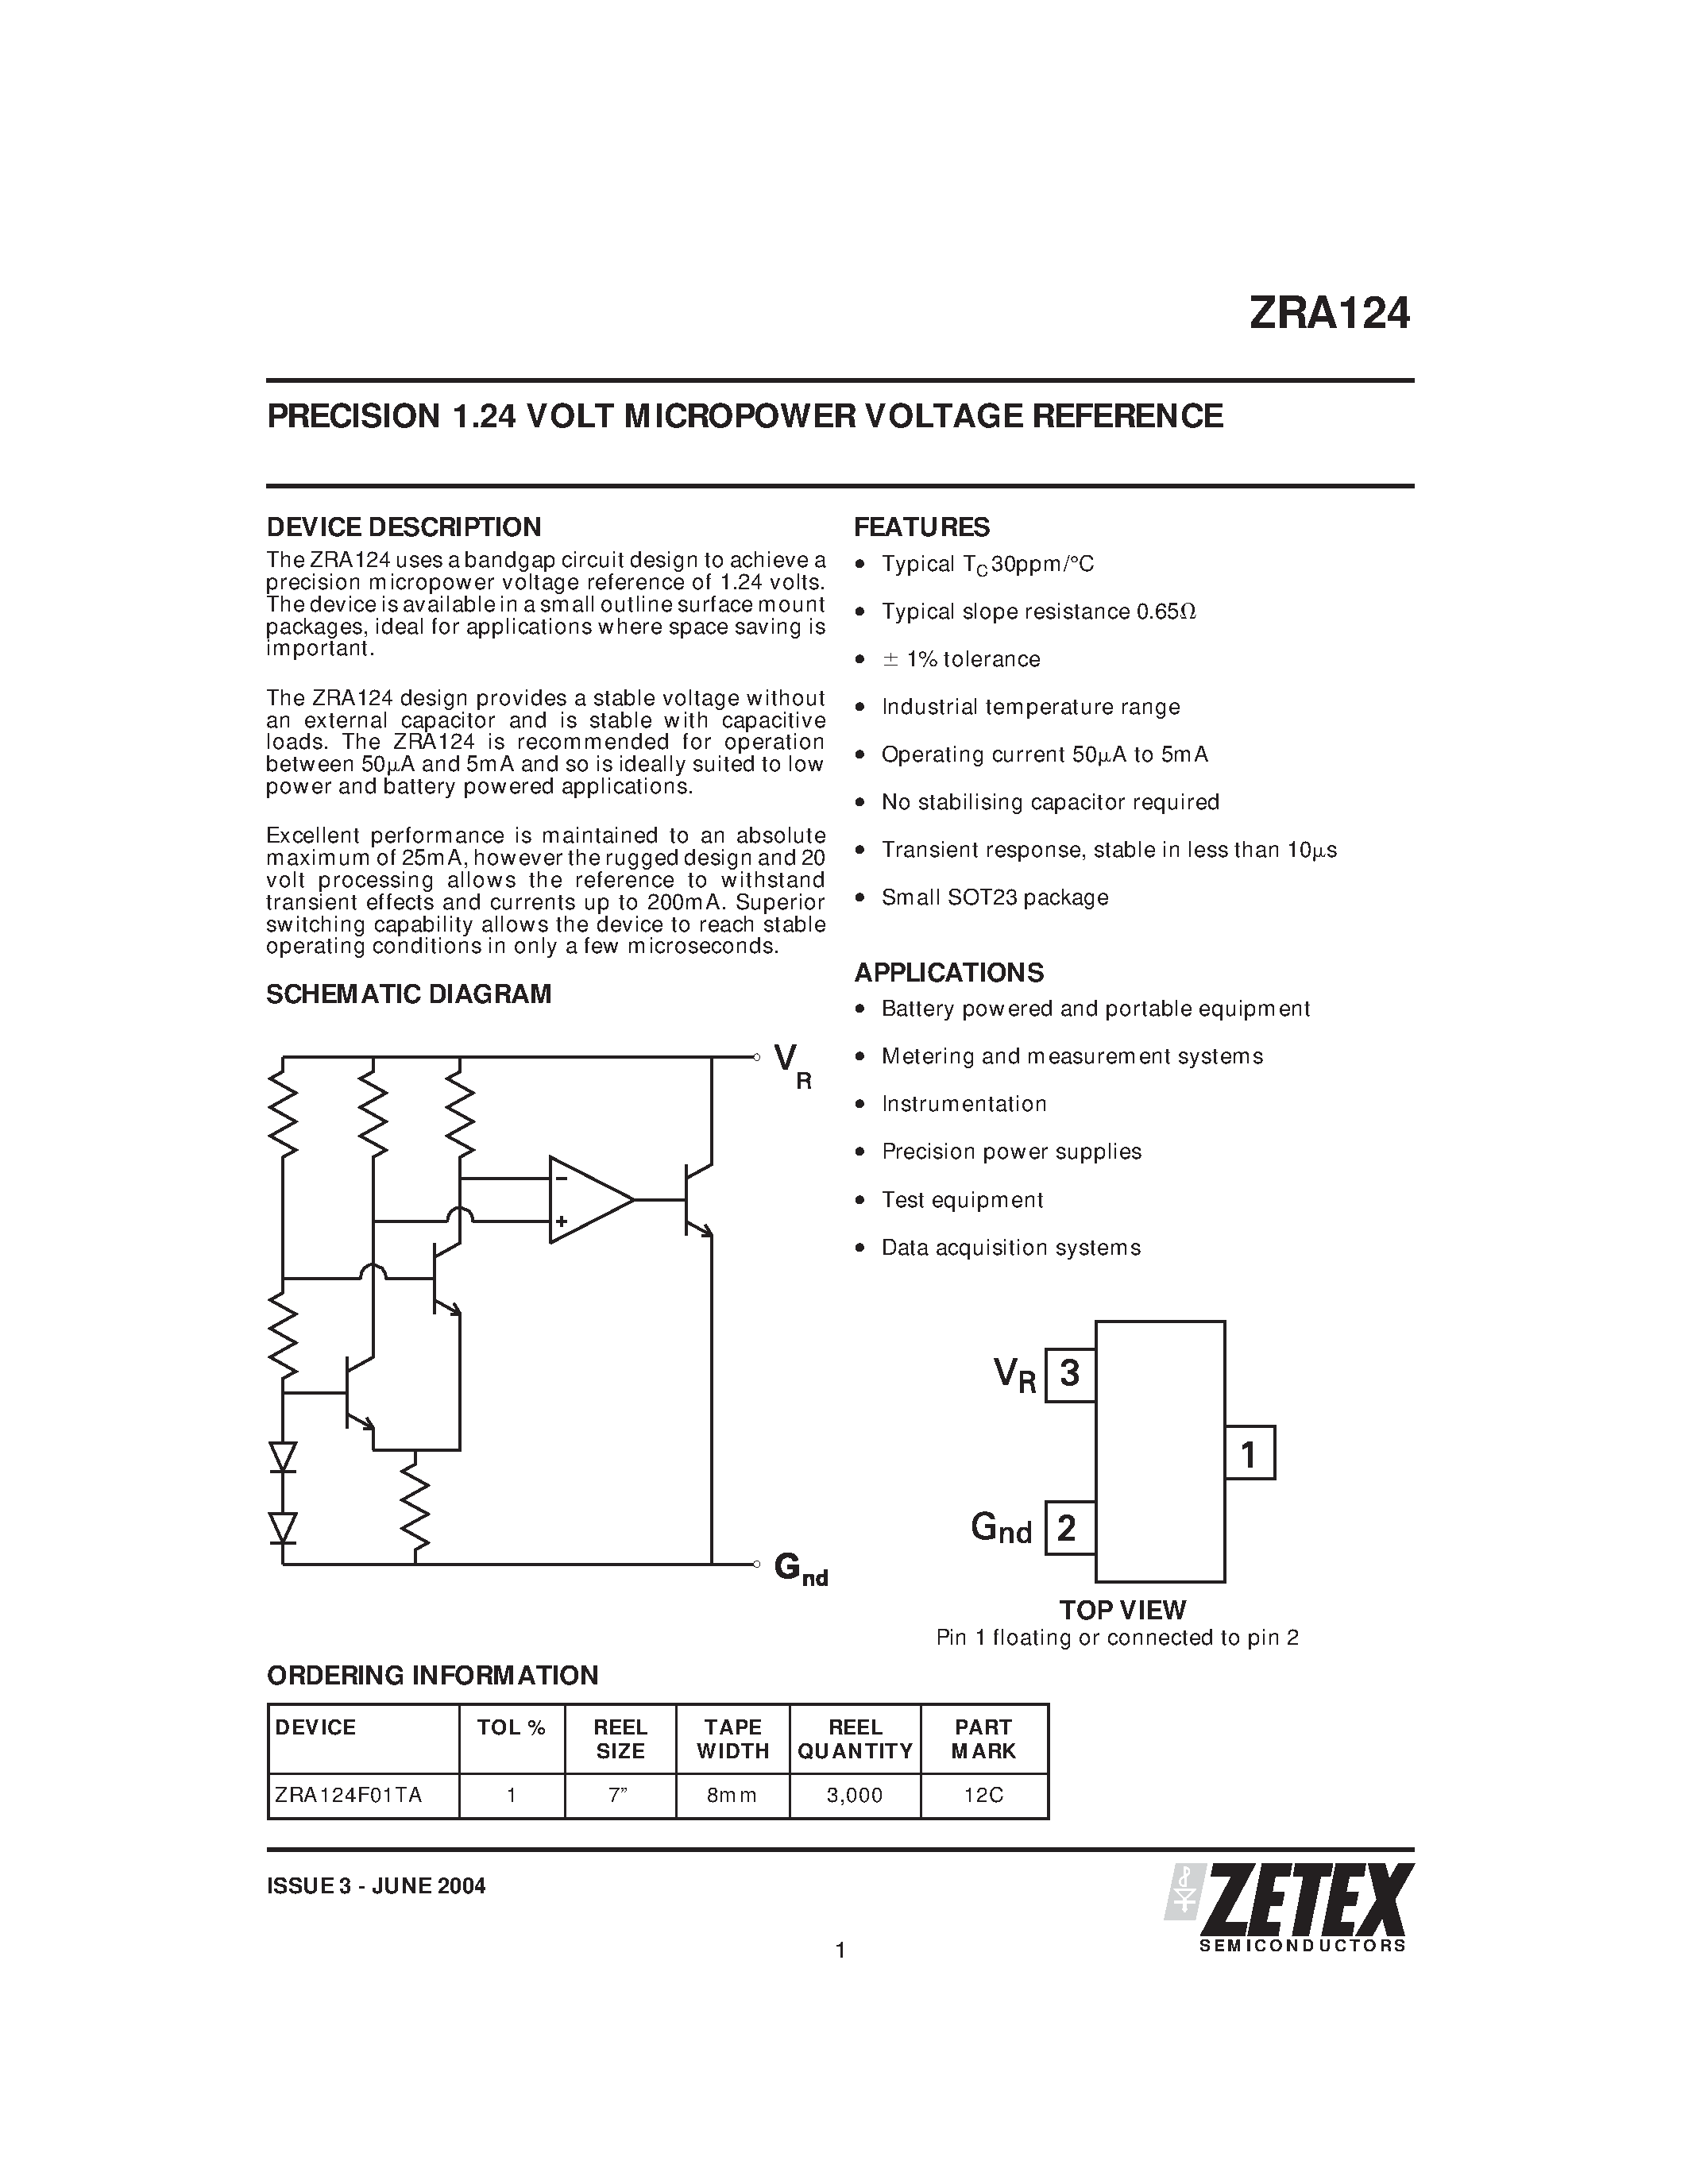 Datasheet ZRA124F01TA - PRECISION 1.24 VOLT MICROPOWER VOLTAGE REFERENCE page 1